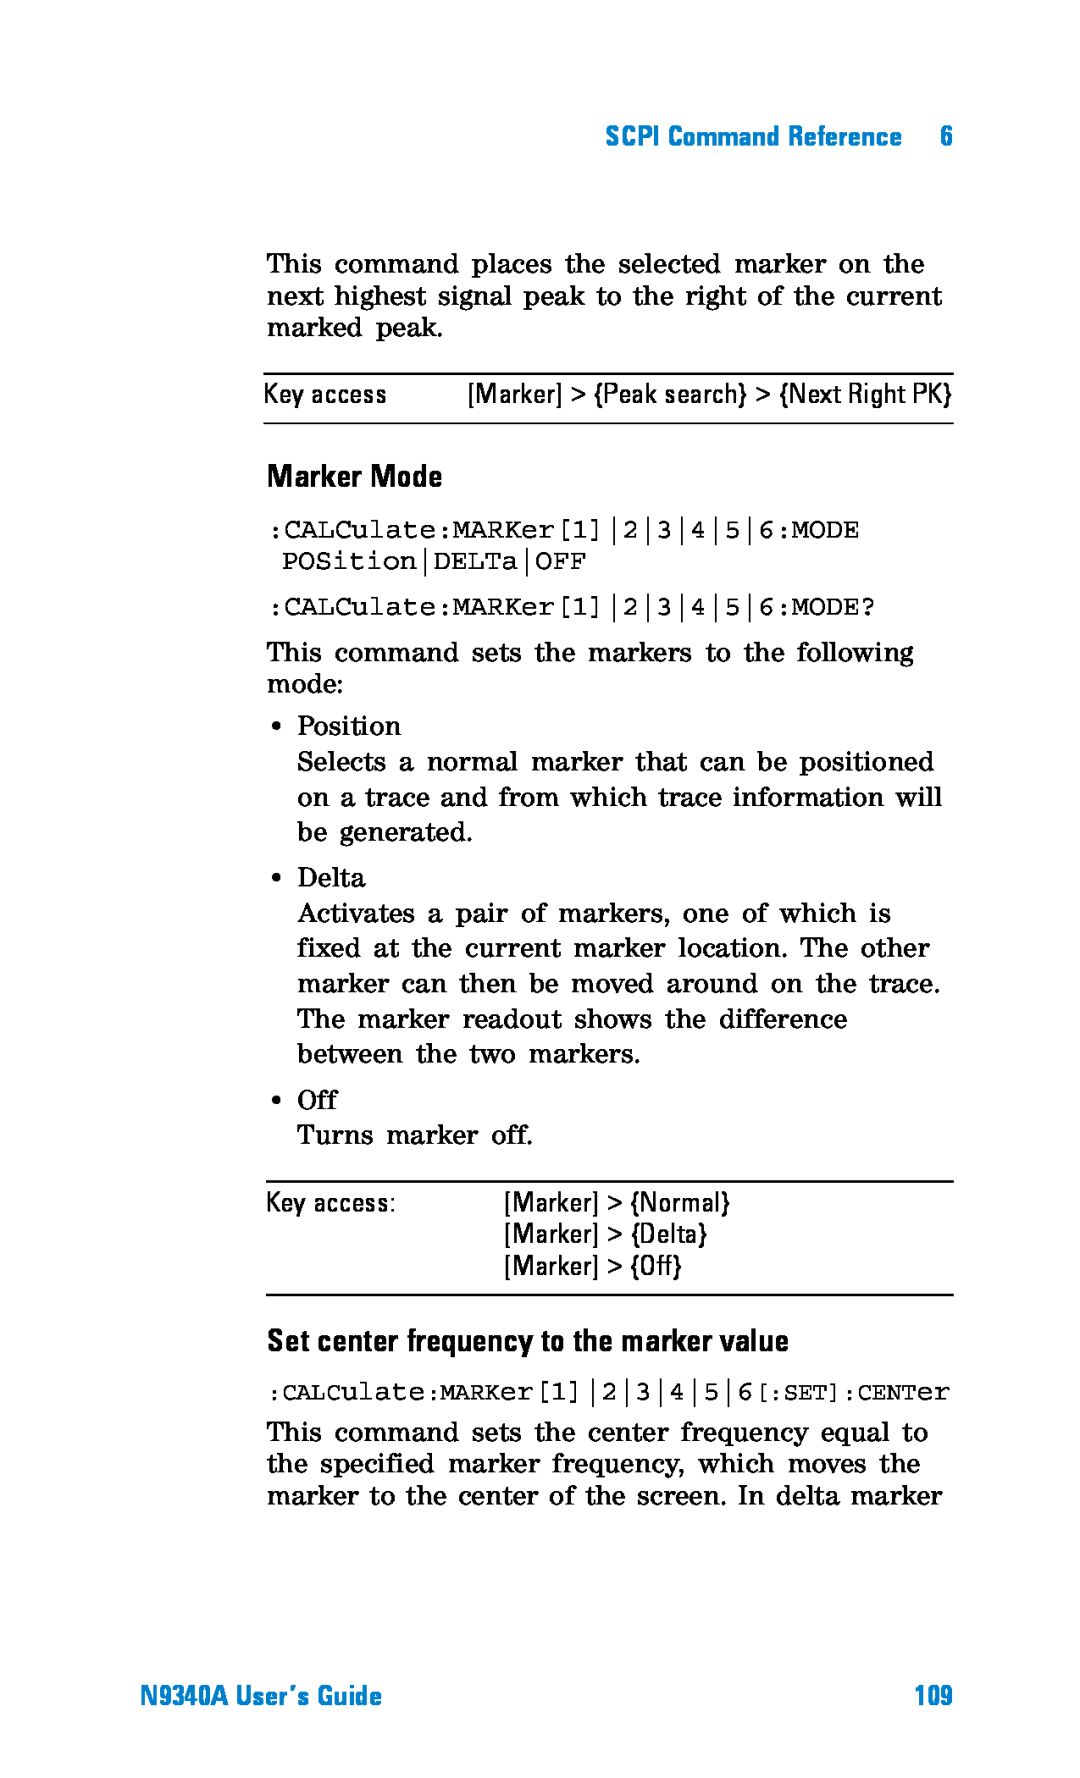 Agilent Technologies N9340A manual Marker Mode, Set center frequency to the marker value, SCPI Command Reference 